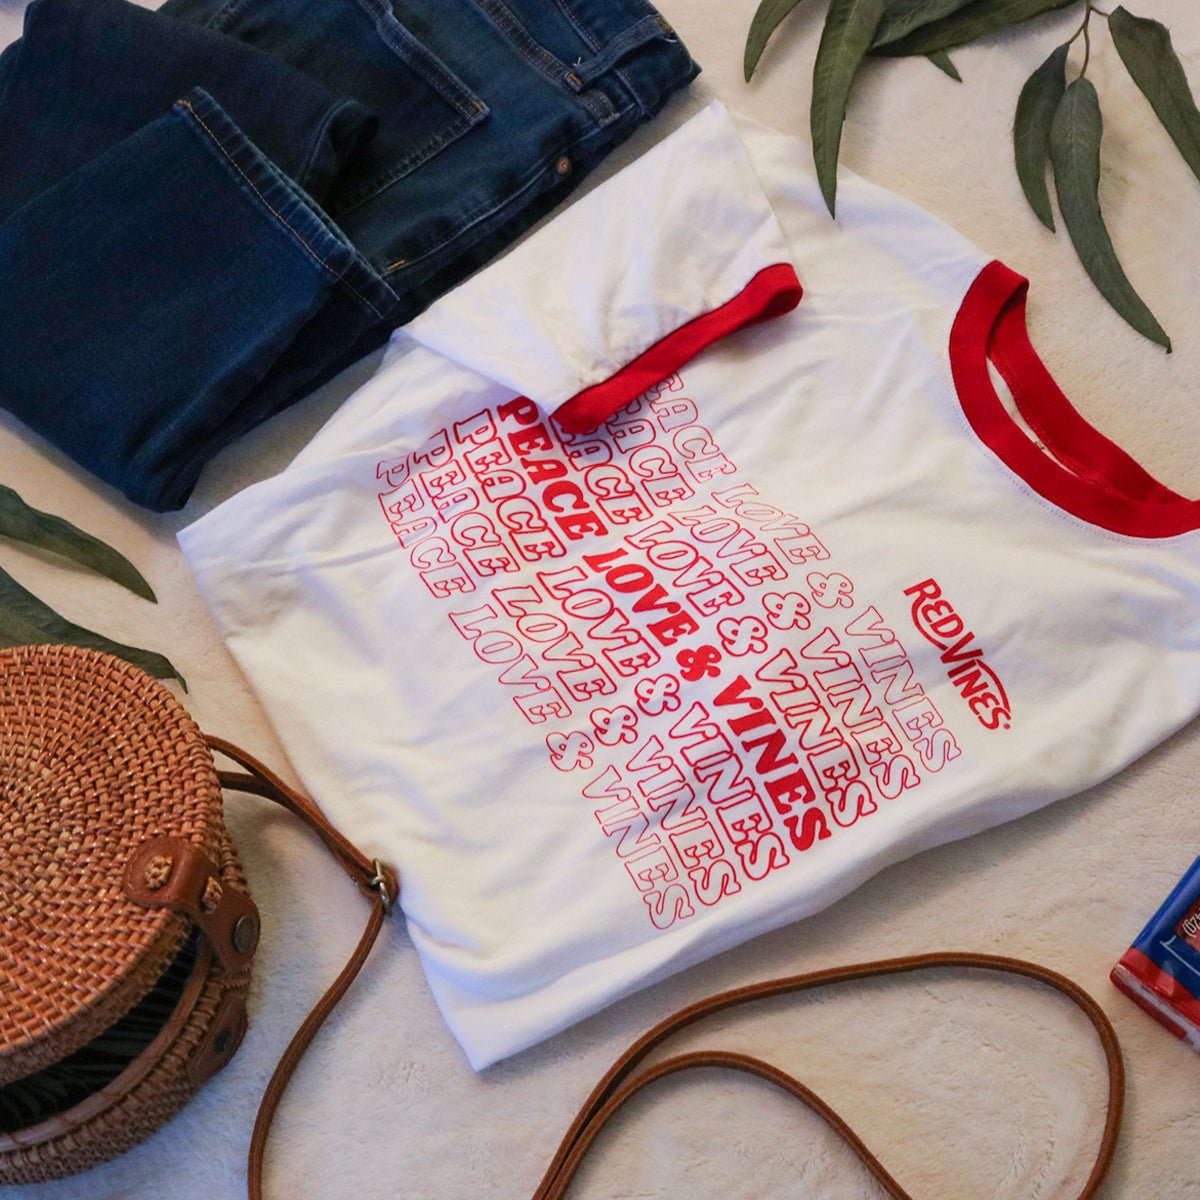 RED VINES Red and White Peace, Love & Vines T-Shirt with blue jeans and a wicker purse